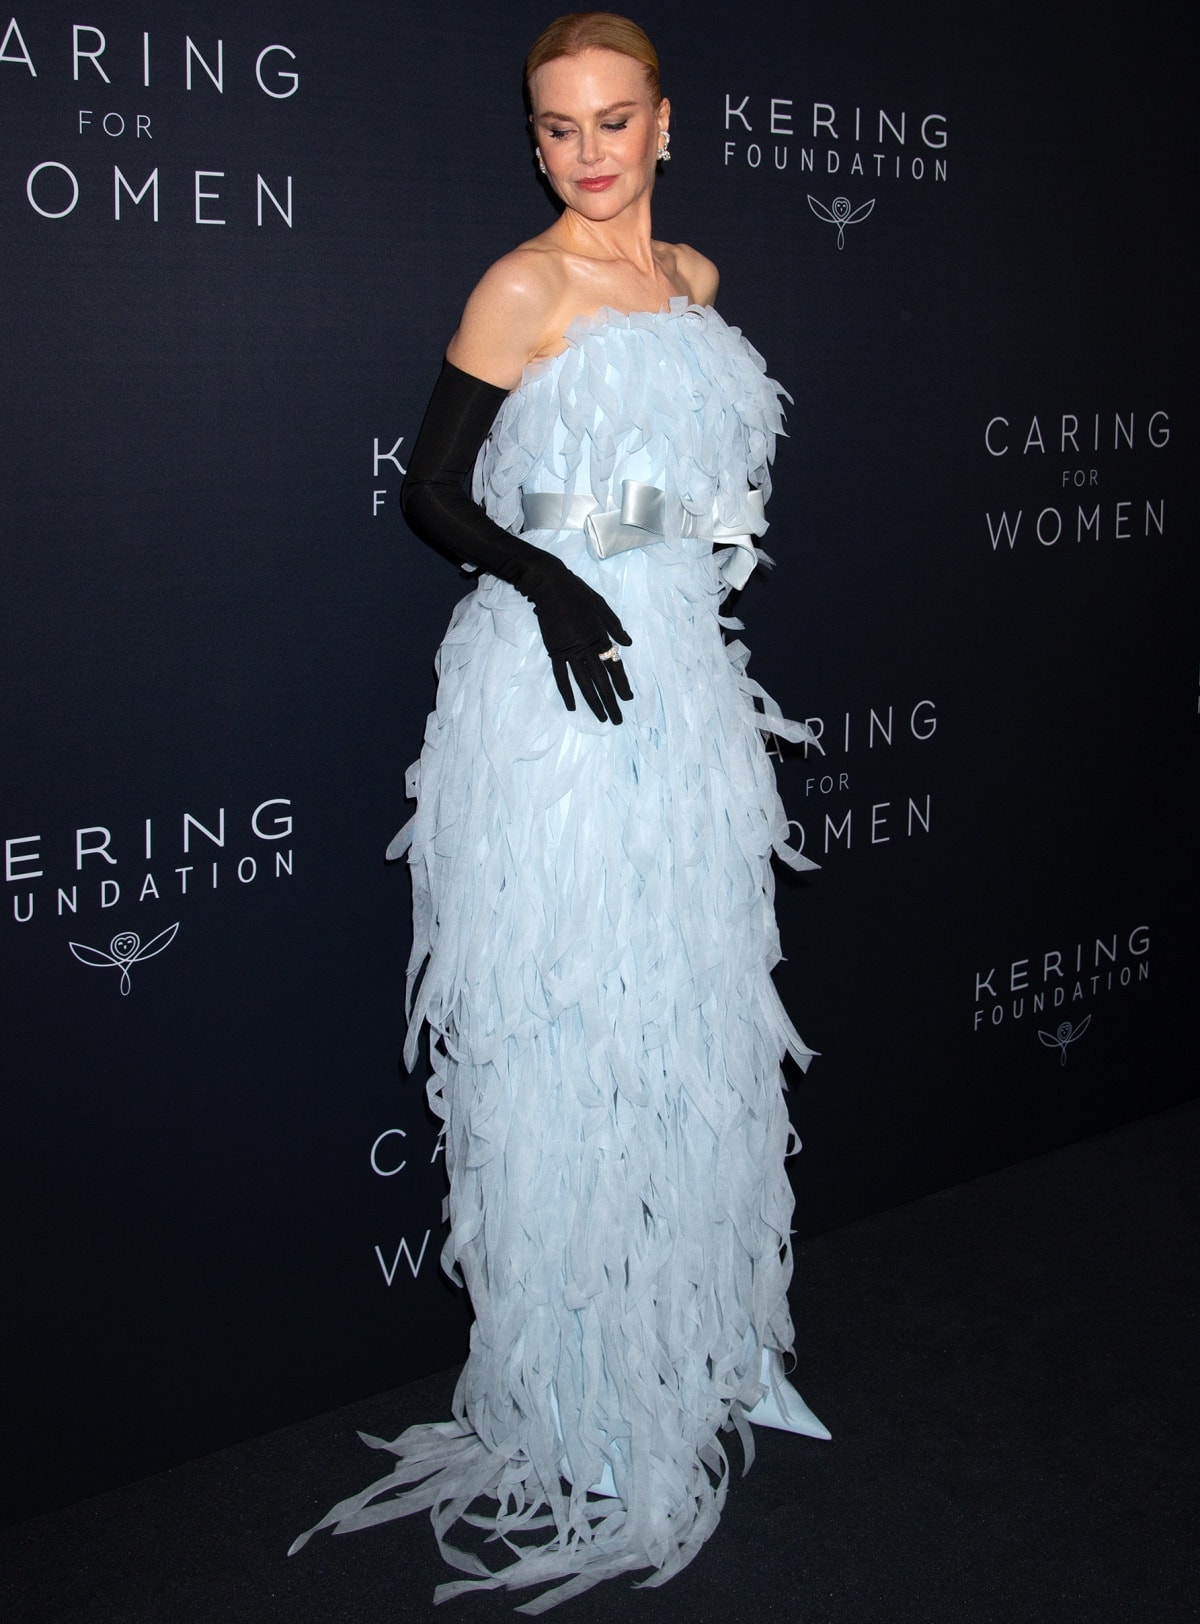 Nicole Kidman wearing black opera gloves and pale blue Balenciaga boots for added drama to her look